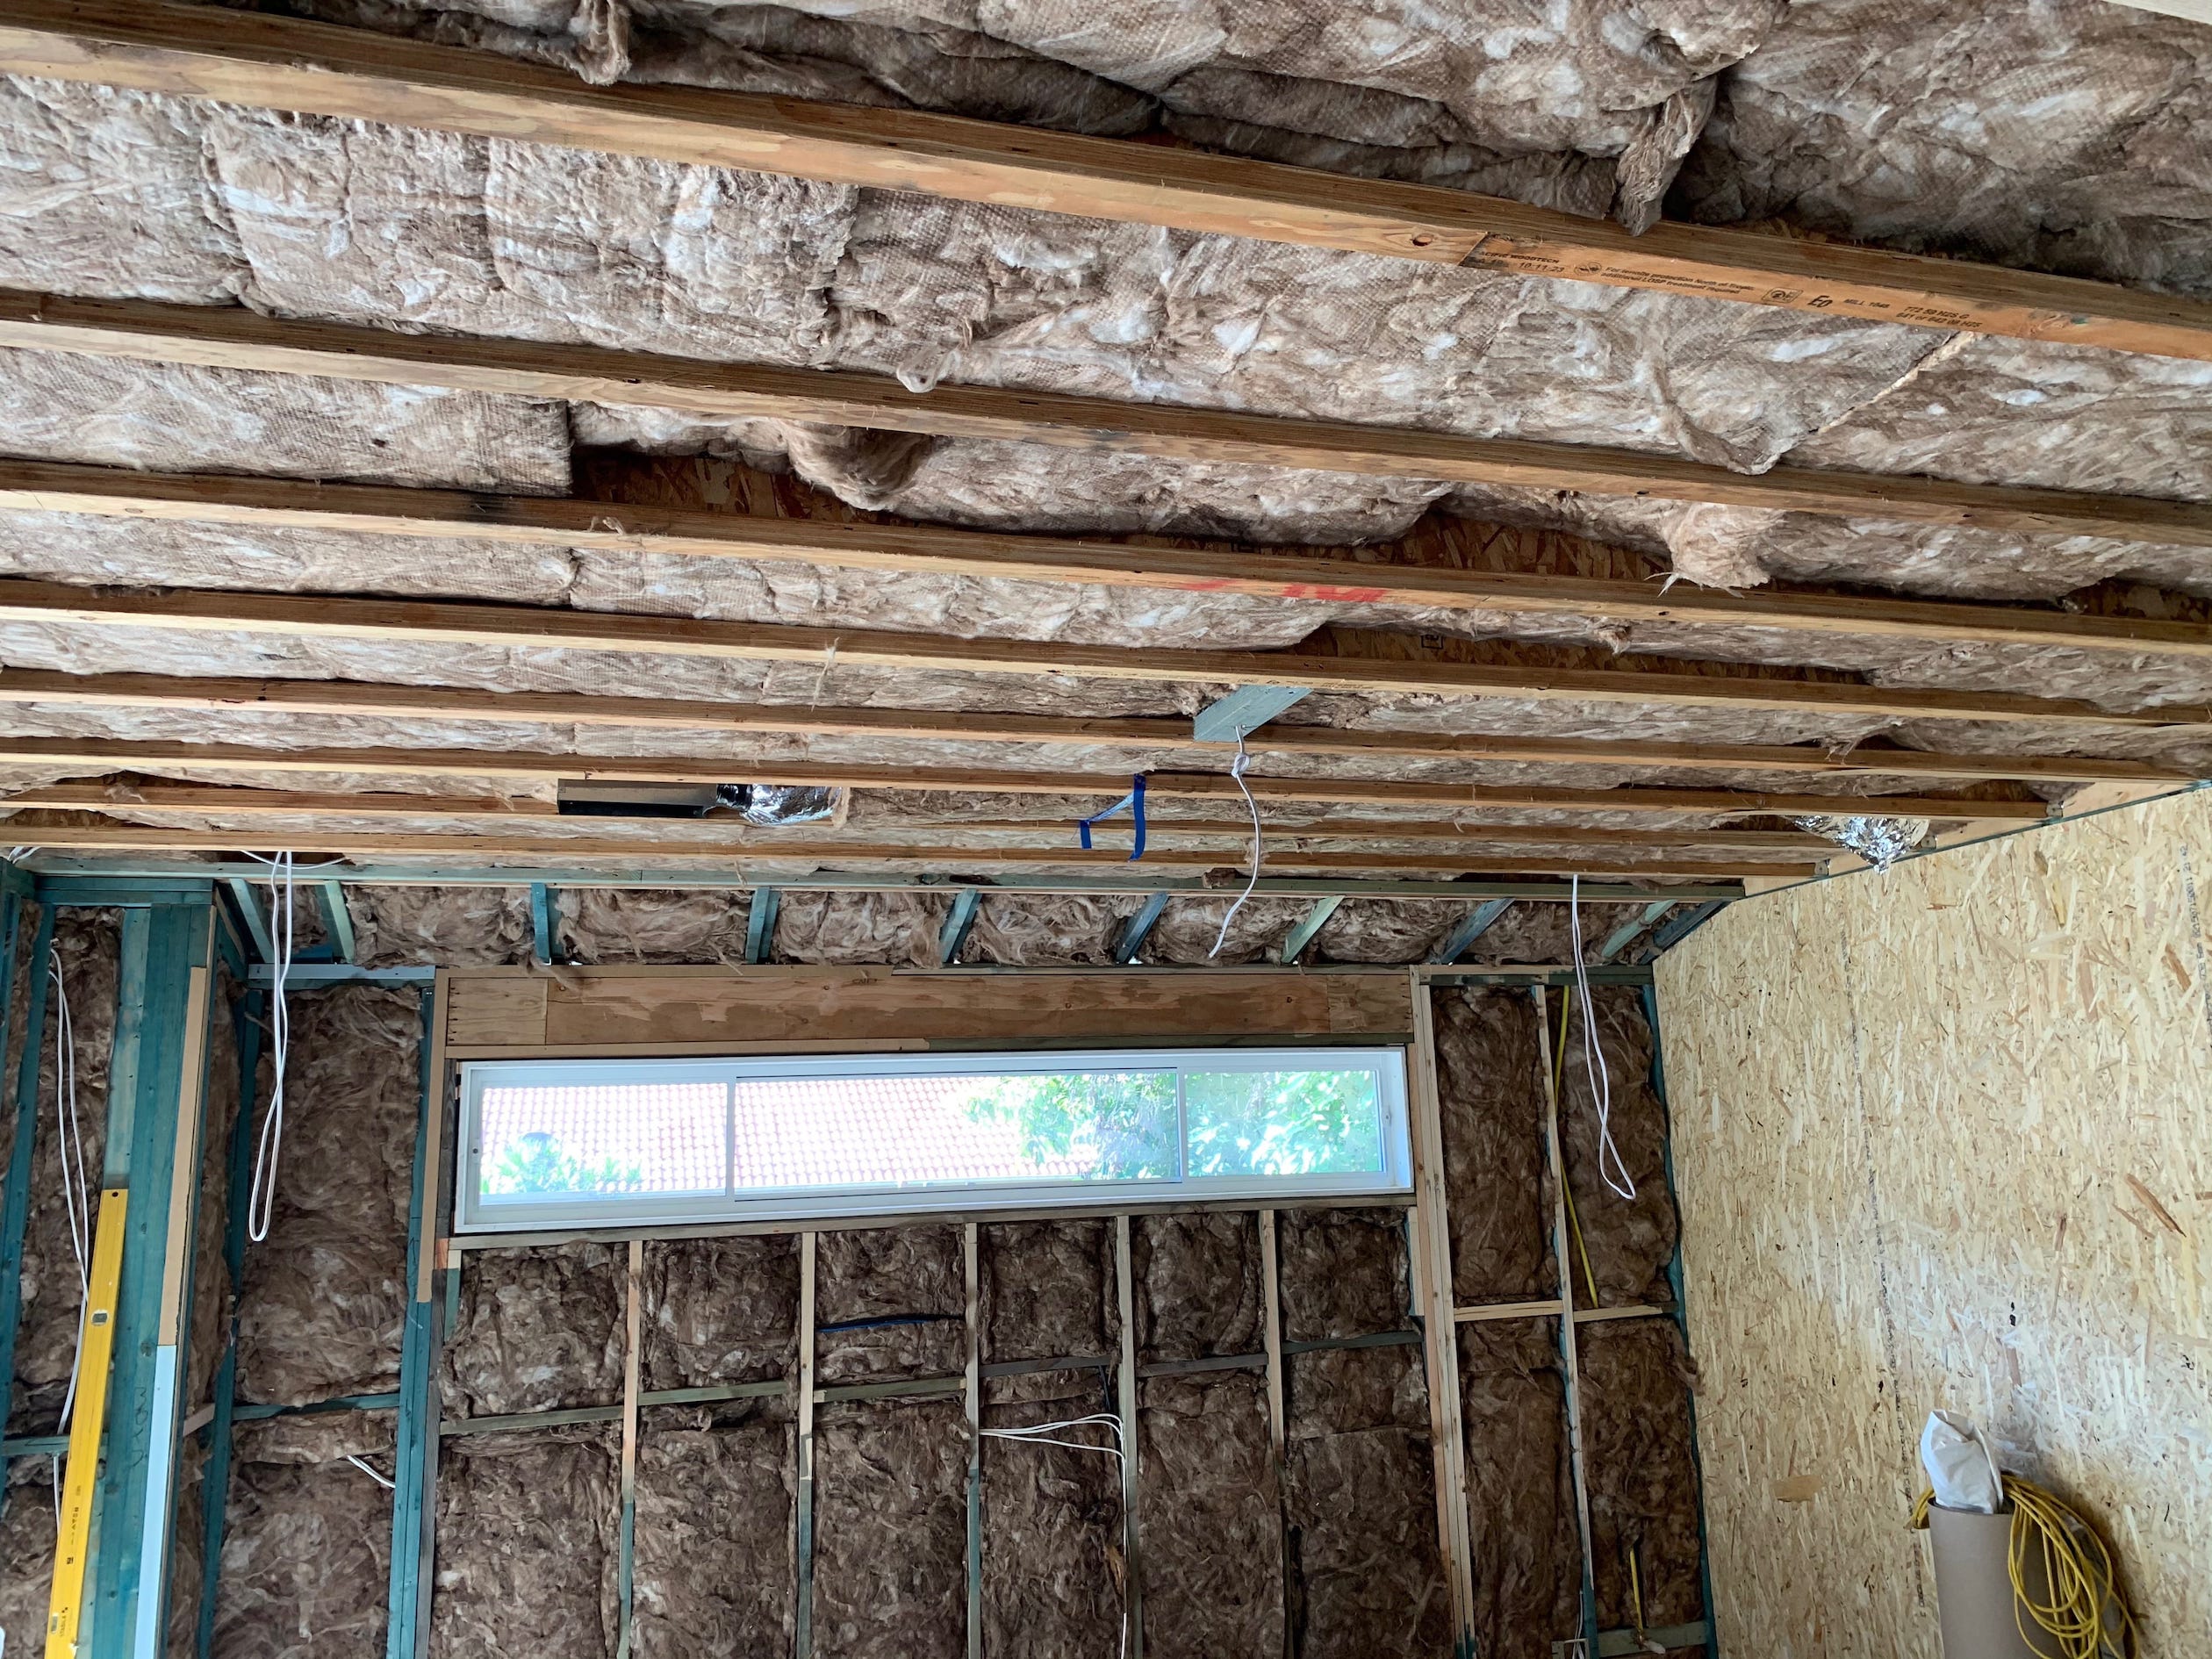 A photo of the insulation within a wall and a portion of the ceiliing, placed in between wooden beams.